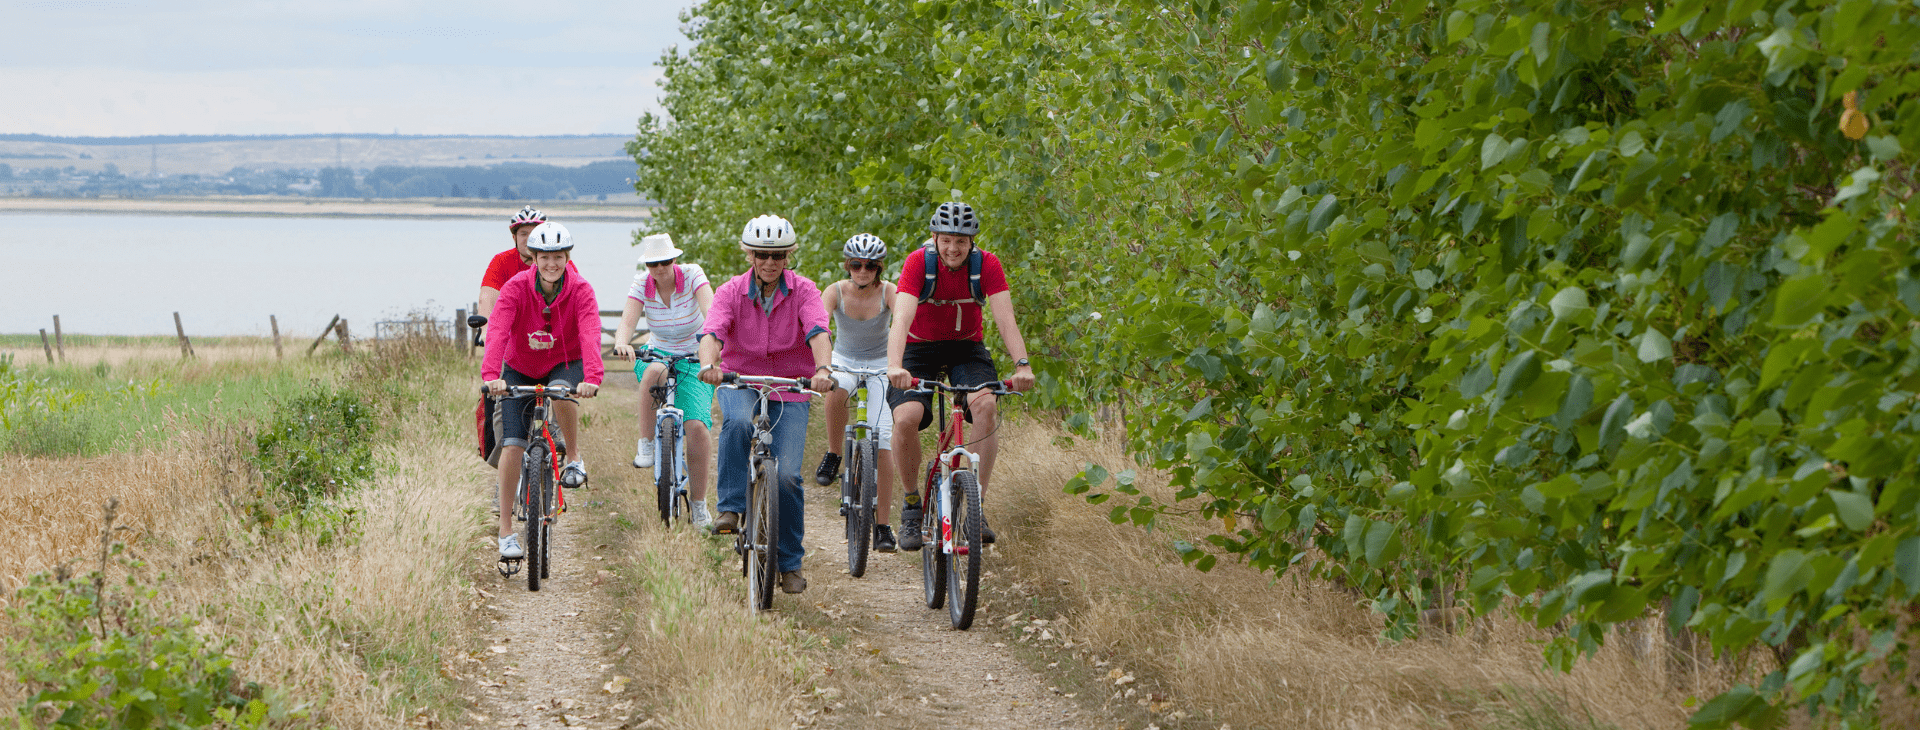 Group of people cycling outside